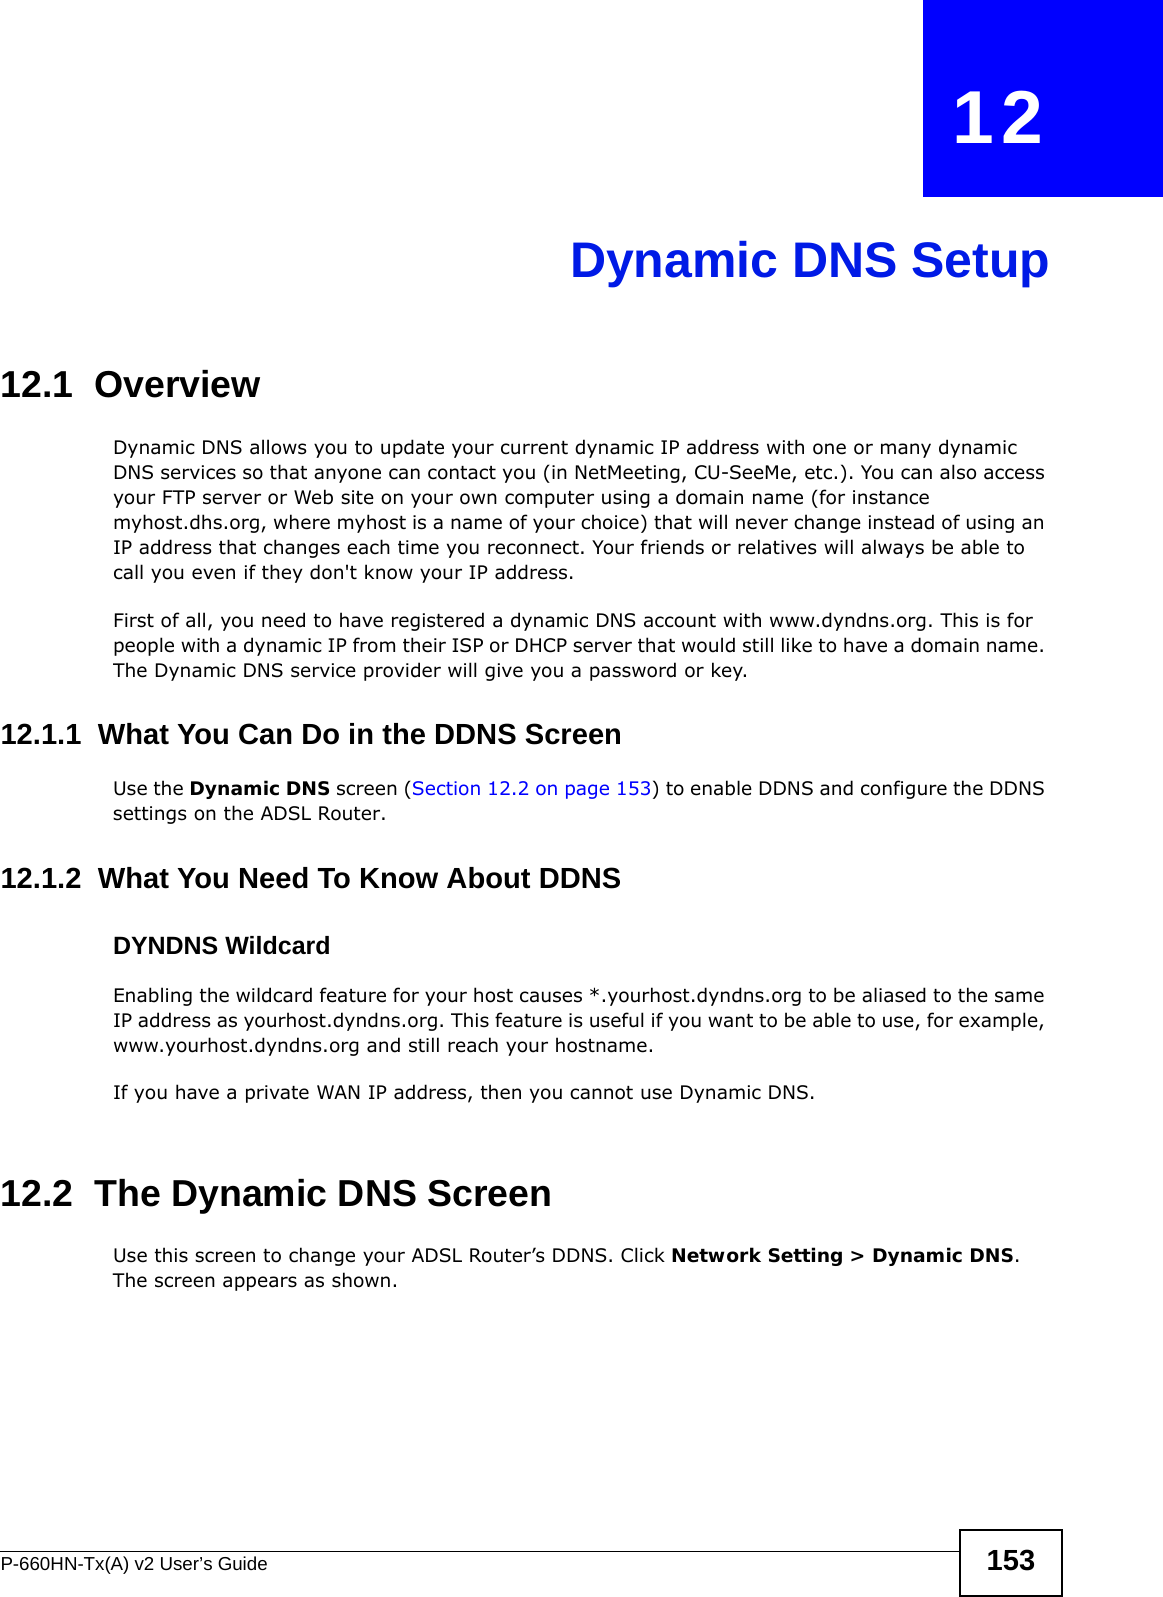 P-660HN-Tx(A) v2 User’s Guide 153CHAPTER   12Dynamic DNS Setup12.1  Overview Dynamic DNS allows you to update your current dynamic IP address with one or many dynamic DNS services so that anyone can contact you (in NetMeeting, CU-SeeMe, etc.). You can also access your FTP server or Web site on your own computer using a domain name (for instance myhost.dhs.org, where myhost is a name of your choice) that will never change instead of using an IP address that changes each time you reconnect. Your friends or relatives will always be able to call you even if they don&apos;t know your IP address.First of all, you need to have registered a dynamic DNS account with www.dyndns.org. This is for people with a dynamic IP from their ISP or DHCP server that would still like to have a domain name. The Dynamic DNS service provider will give you a password or key. 12.1.1  What You Can Do in the DDNS ScreenUse the Dynamic DNS screen (Section 12.2 on page 153) to enable DDNS and configure the DDNS settings on the ADSL Router.12.1.2  What You Need To Know About DDNSDYNDNS WildcardEnabling the wildcard feature for your host causes *.yourhost.dyndns.org to be aliased to the same IP address as yourhost.dyndns.org. This feature is useful if you want to be able to use, for example, www.yourhost.dyndns.org and still reach your hostname.If you have a private WAN IP address, then you cannot use Dynamic DNS.12.2  The Dynamic DNS ScreenUse this screen to change your ADSL Router’s DDNS. Click Network Setting &gt; Dynamic DNS. The screen appears as shown.